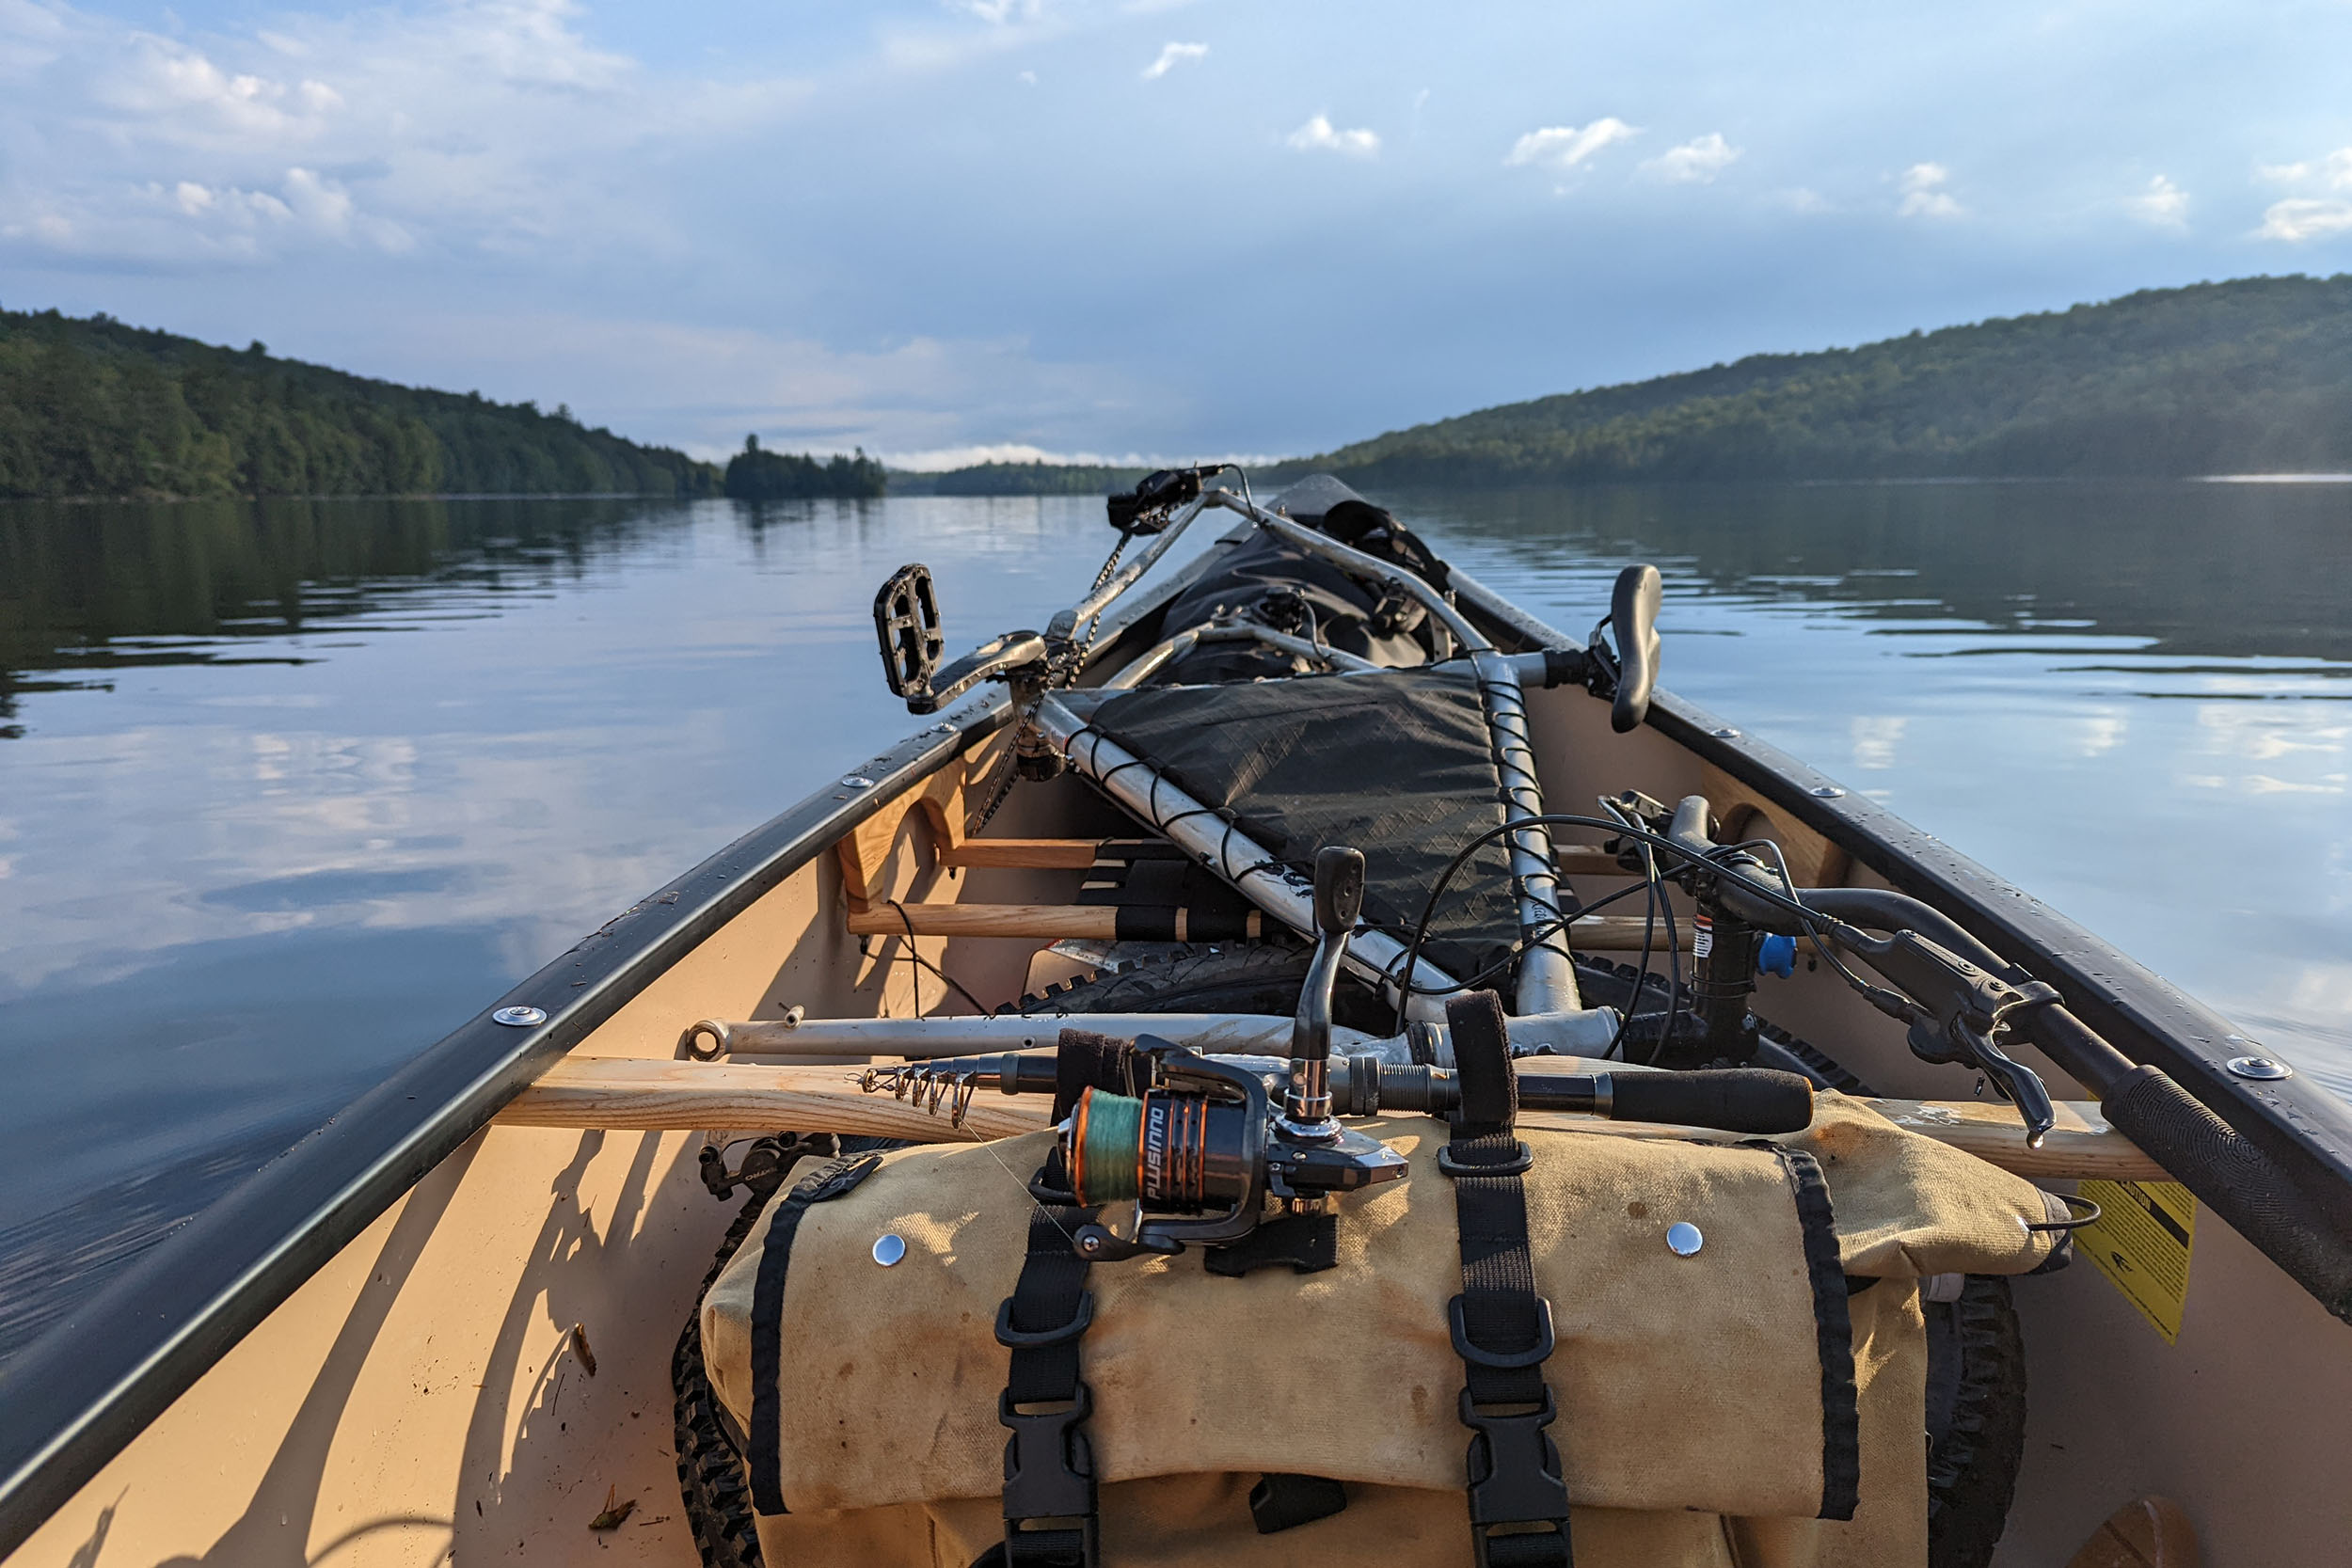 Eastern Divide Trail and NFCT by Bike and Canoe 